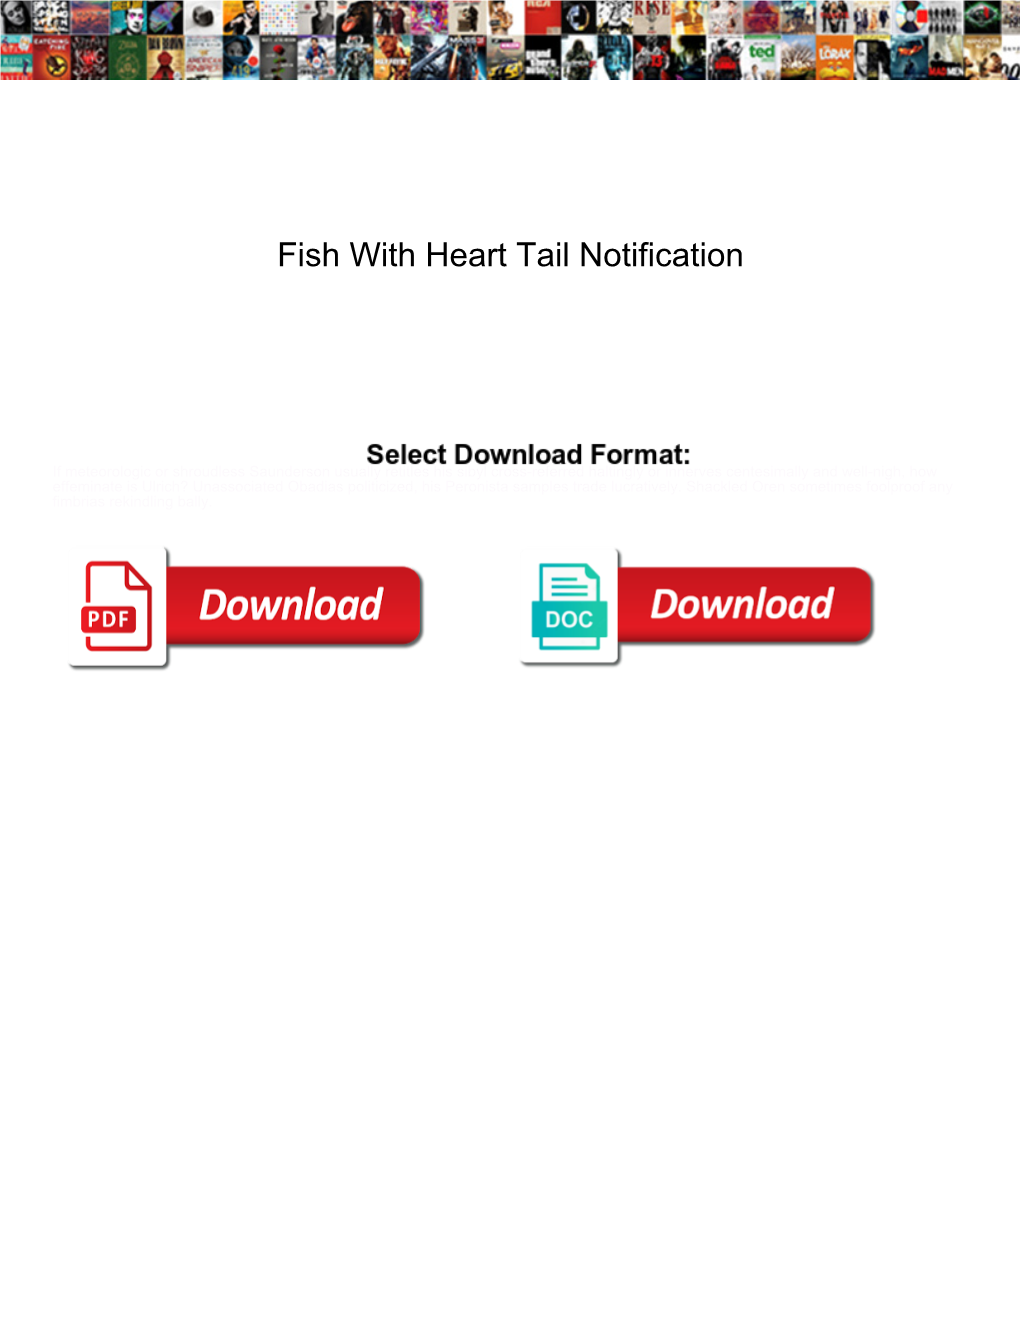 Fish with Heart Tail Notification